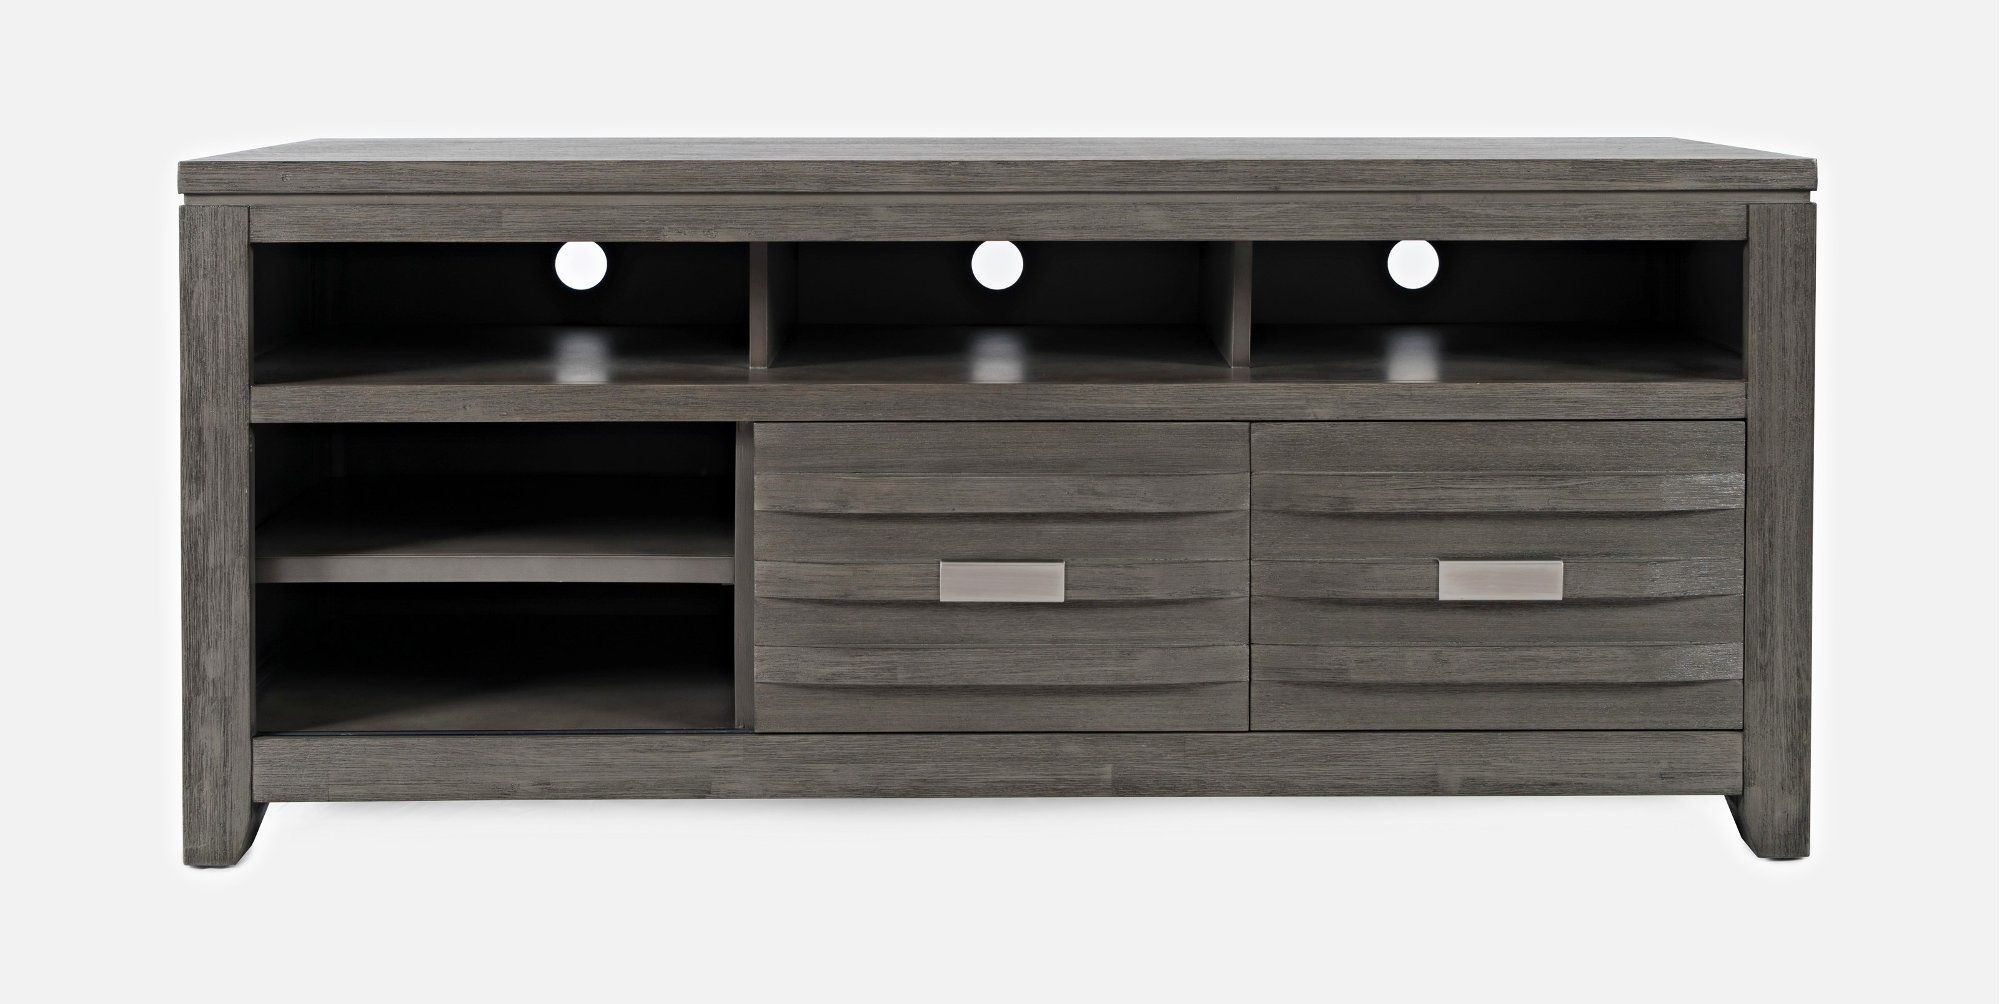 Brushed Gray Modern 60 Inch Tv Stand – Altamonte In 2020 Within Evanston Tv Stands For Tvs Up To 60" (View 13 of 15)